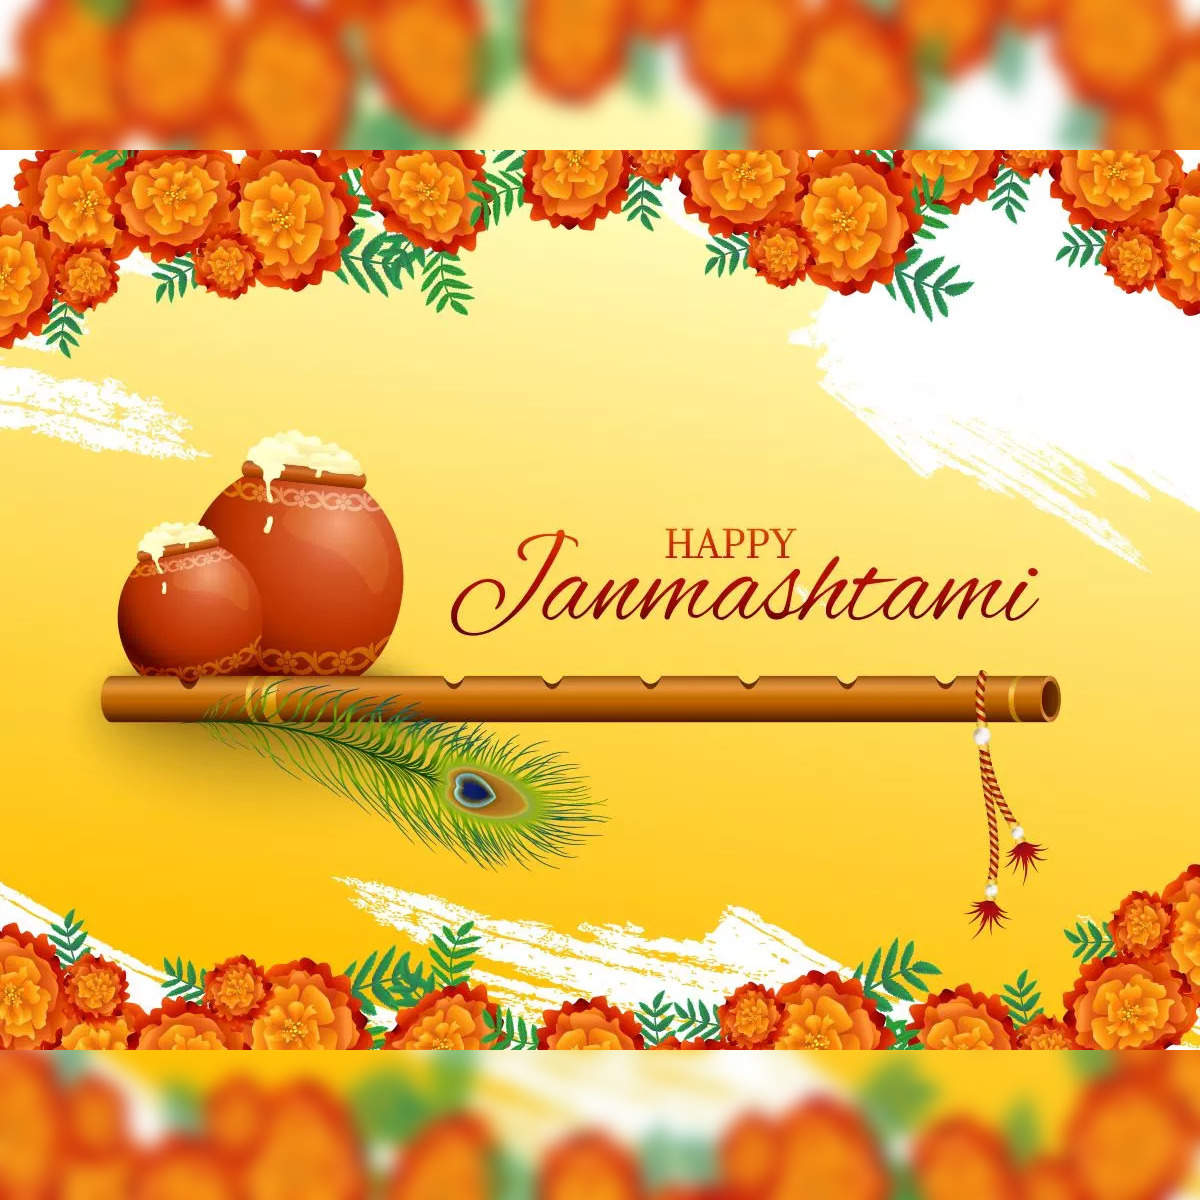 May Lord Krishna Always Shower His Blessings On You - Happy Janmashtami Logo  Png Transparent PNG - 413x300 - Free Download on NicePNG